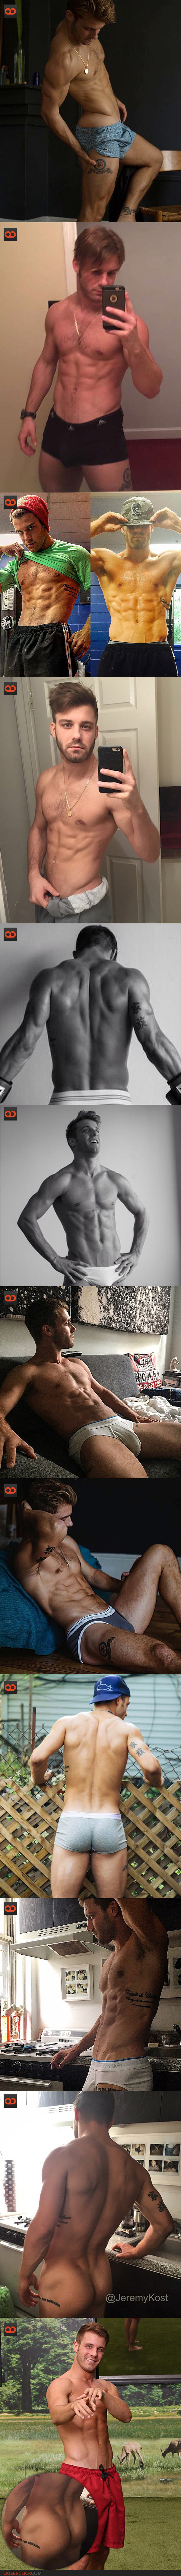 qc-battle_of_the_calbros-big_brother_paulie_calafiore_cody_calafiore_naked-collage04